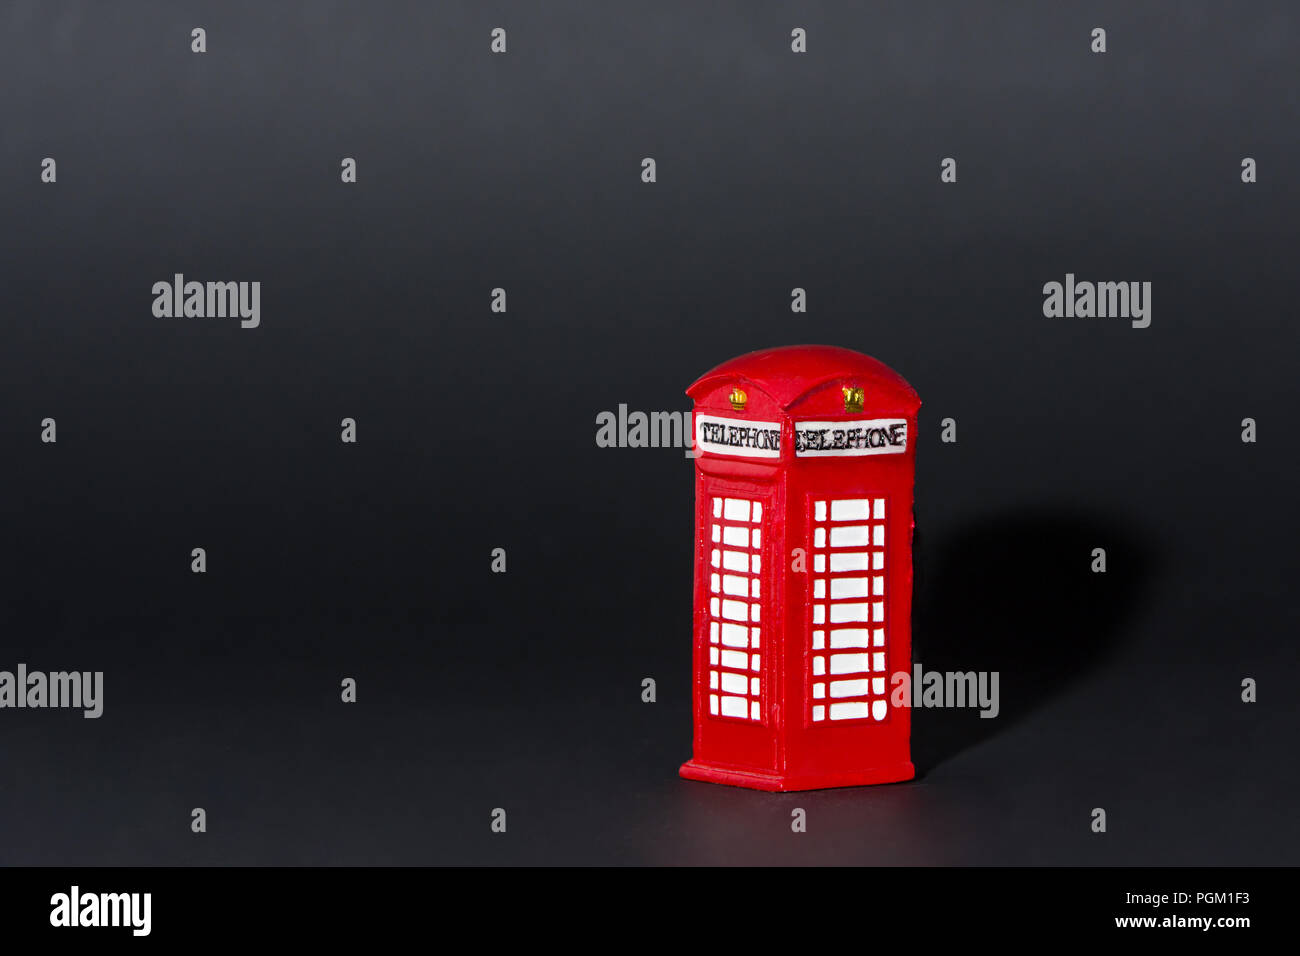 London phone booth on black background Stock Photo